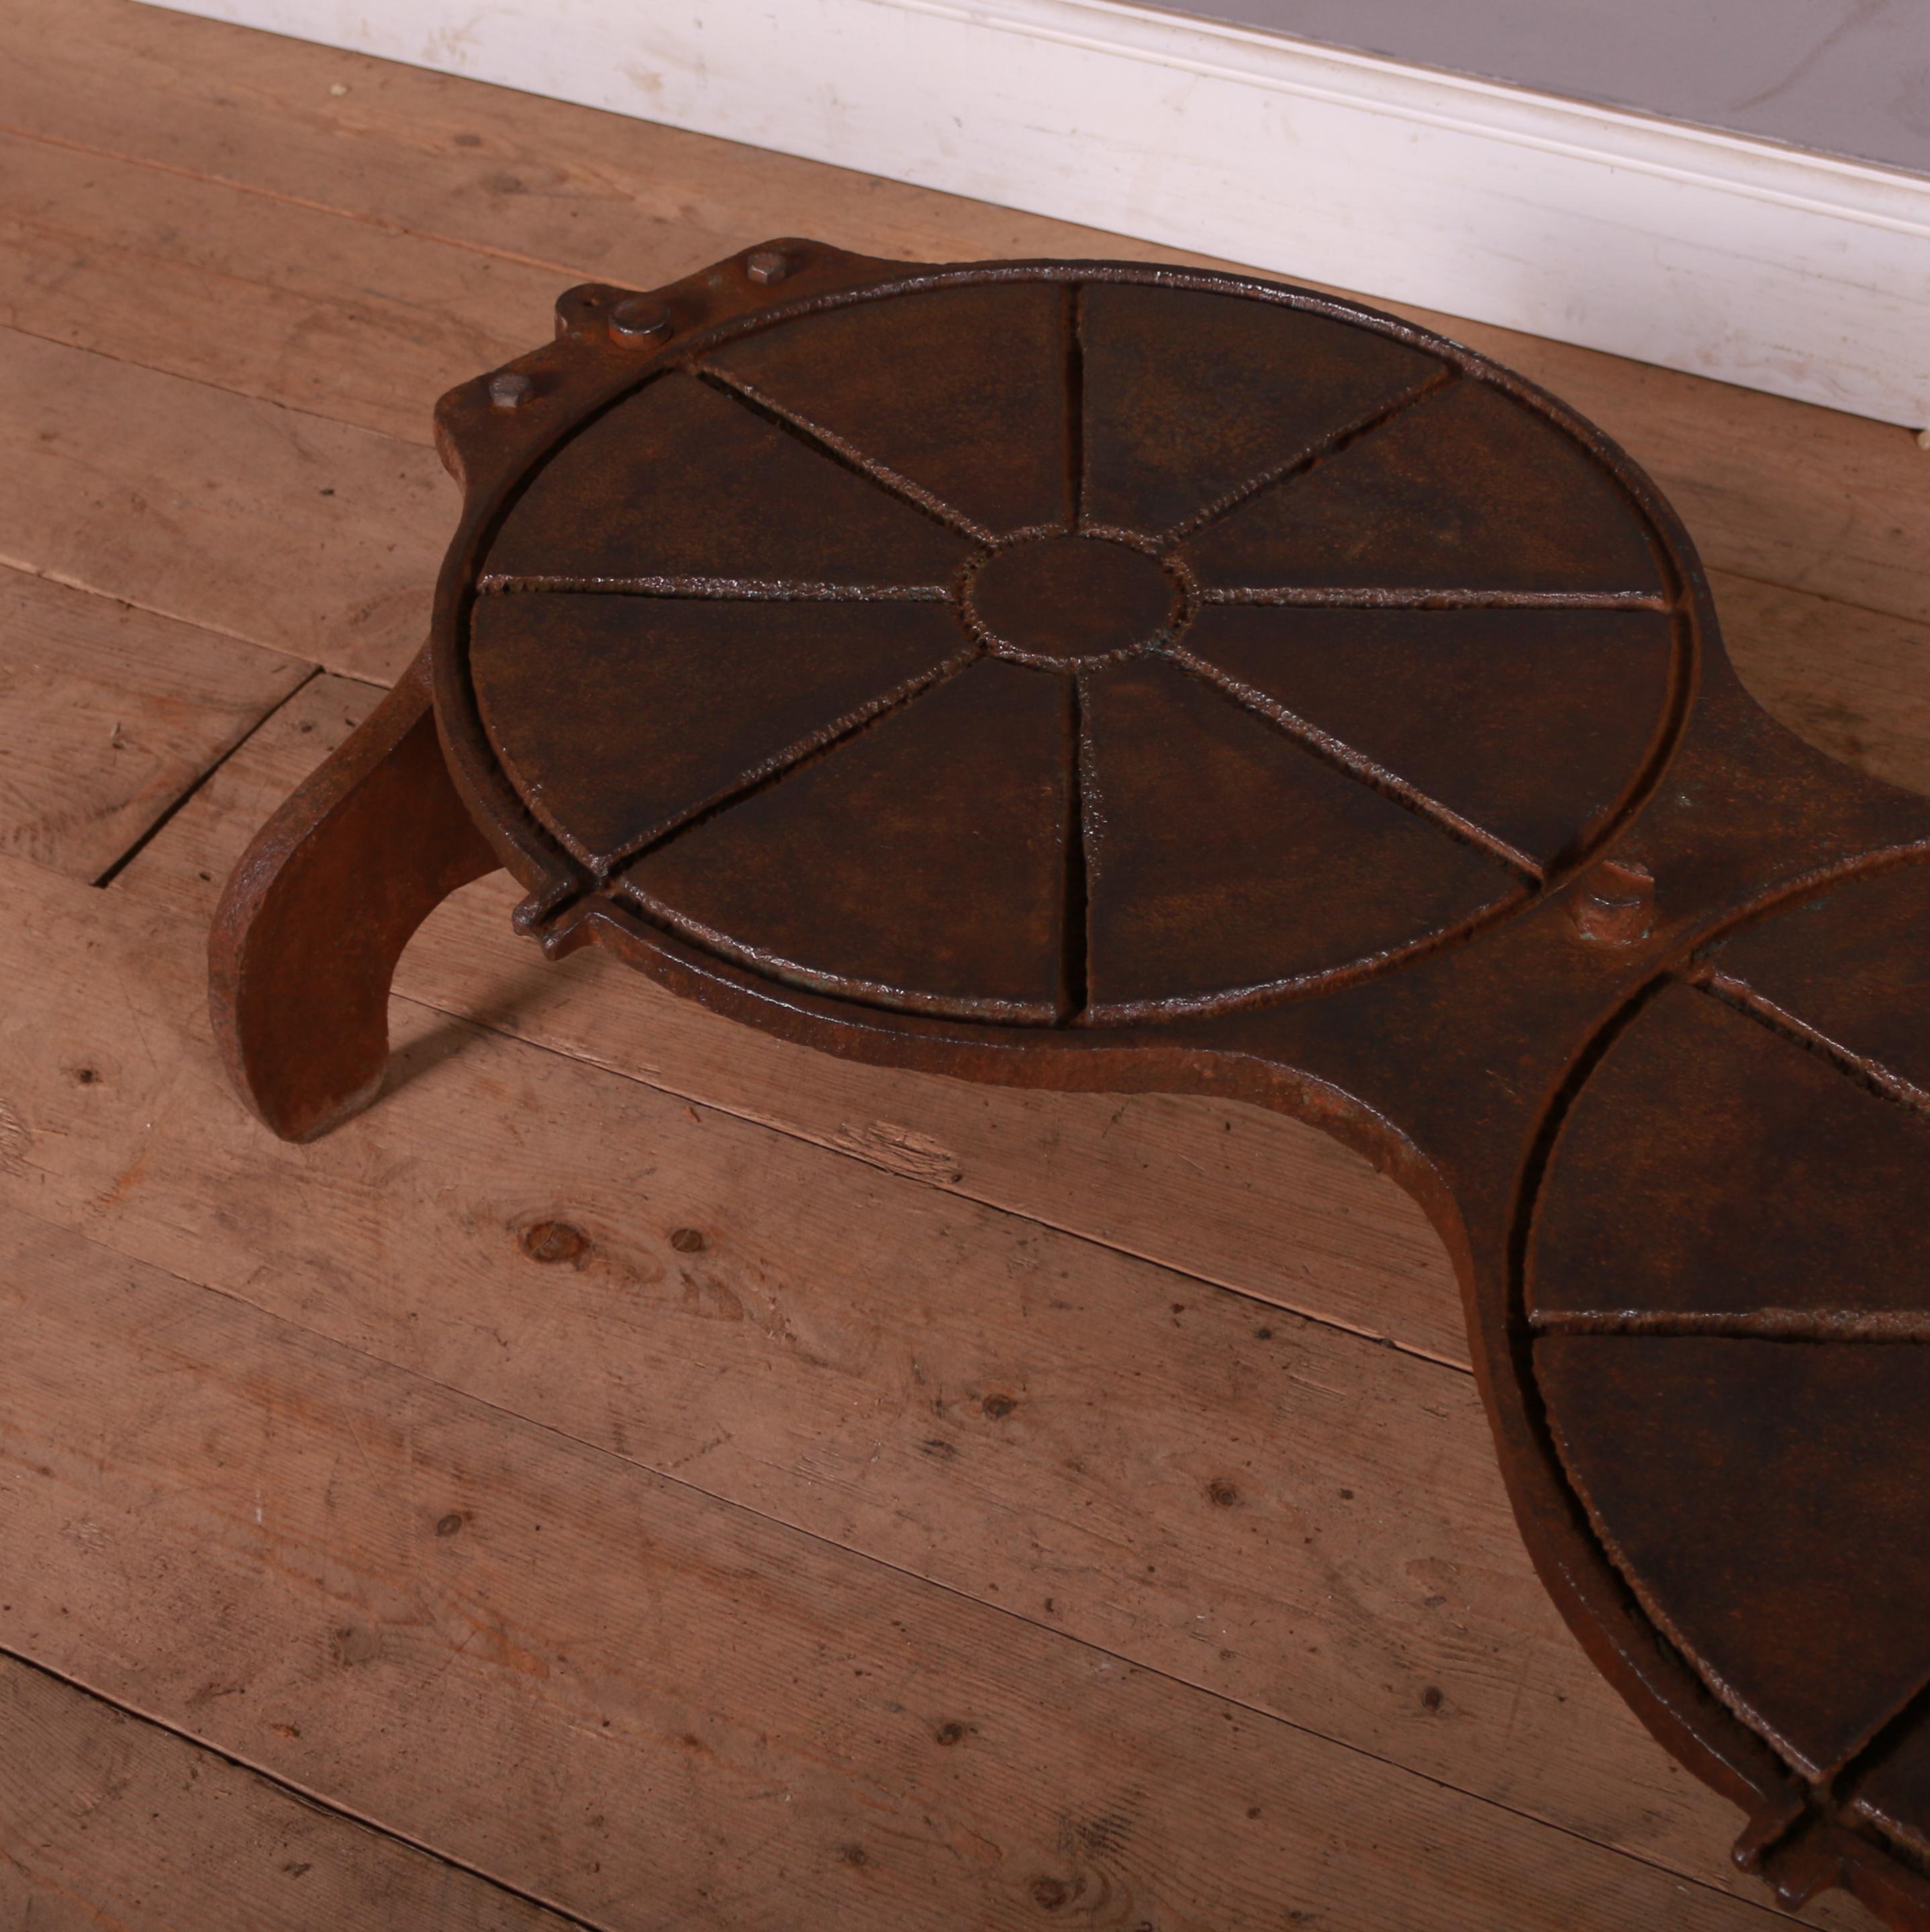 Unusual French industrial coffee table with a burnished old finish. This piece comes from the Saut-du-Tarn, a steel factory located in the town of Albi, Southern France. 1890.

Dimensions
52 inches (132 cms) wide
23.5 inches (60 cms) deep
15